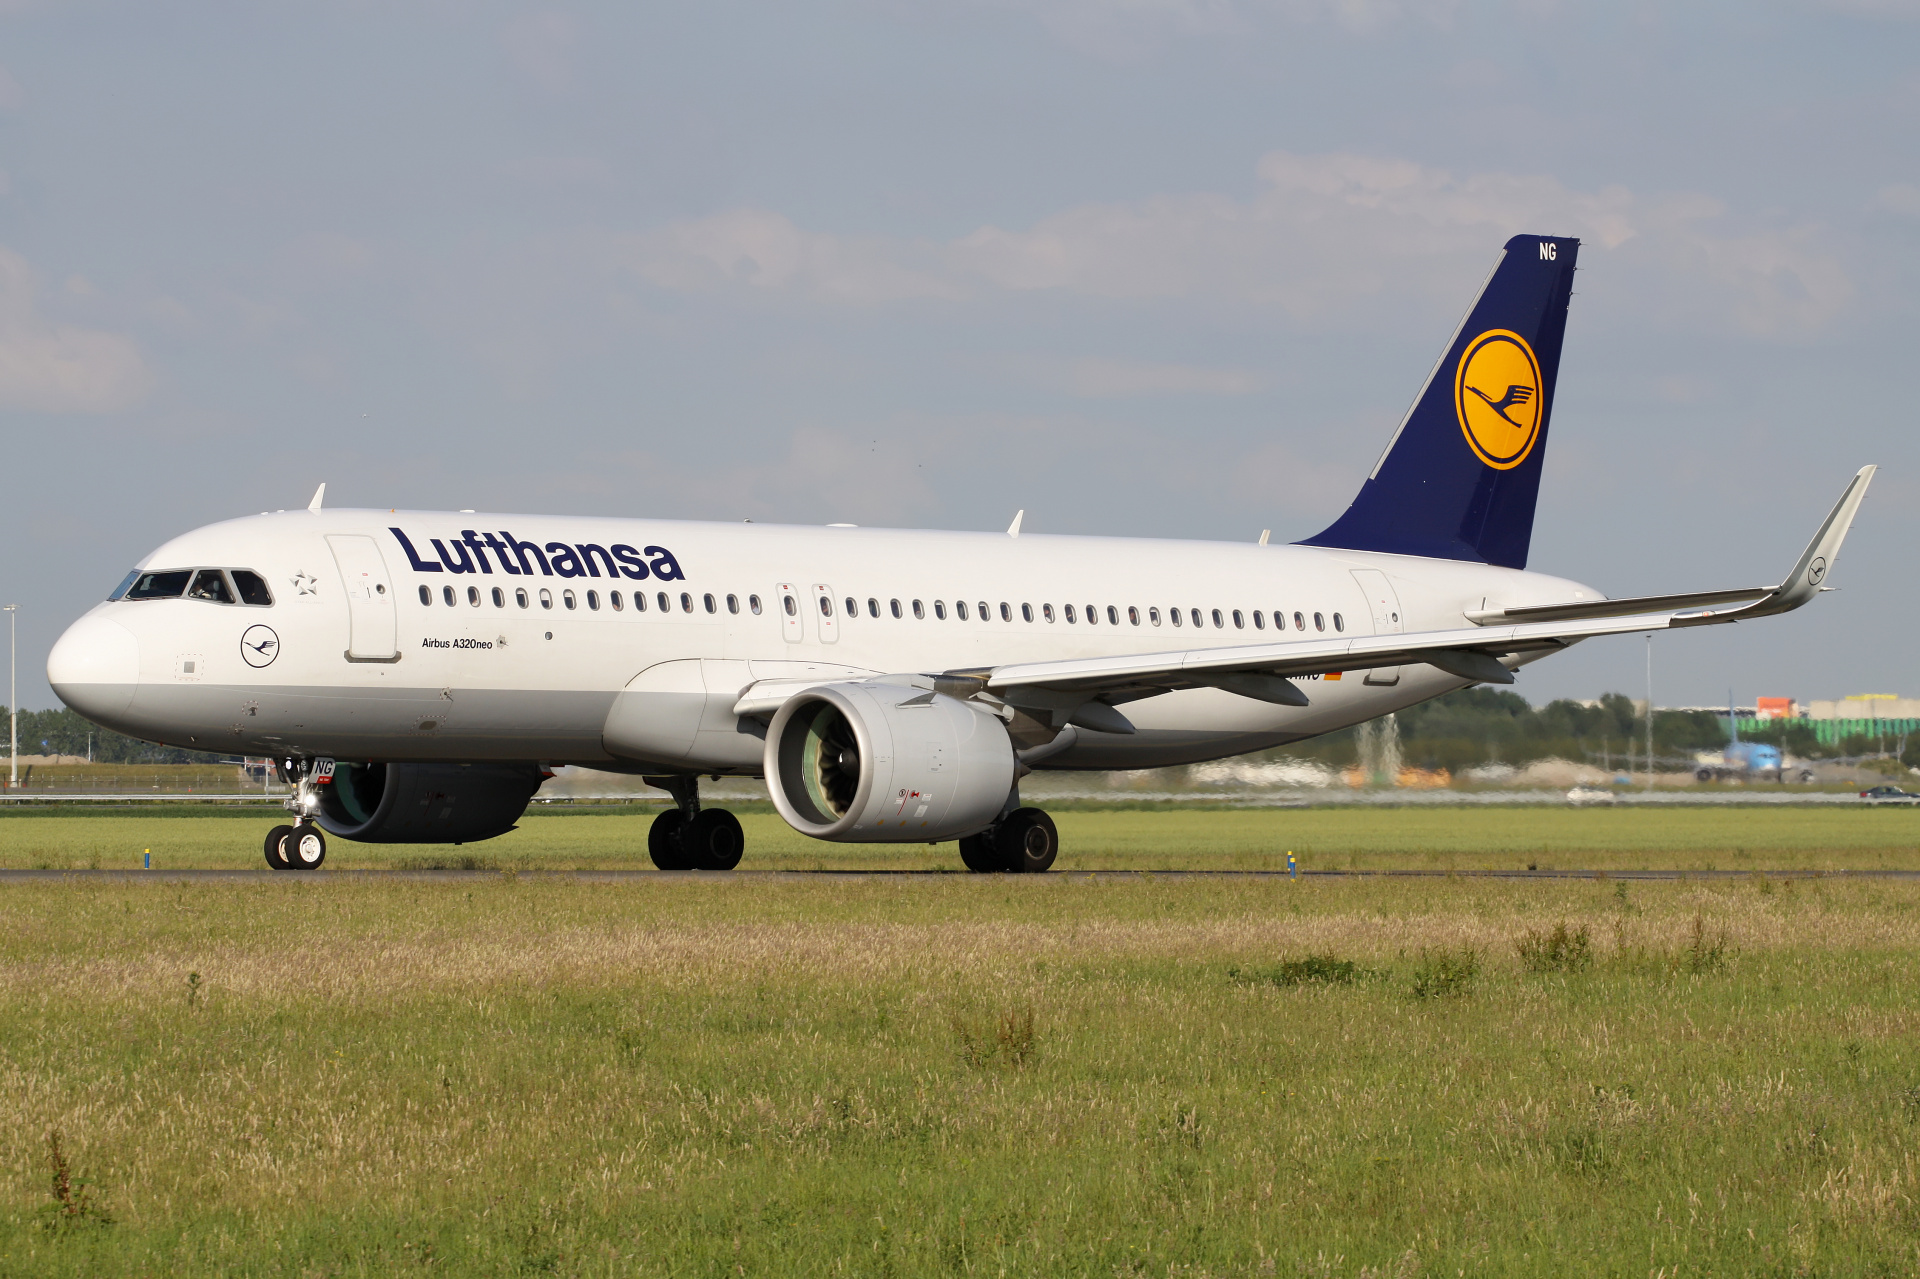 D-AING, Lufthansa (Aircraft » Schiphol Spotting » Airbus A320neo)